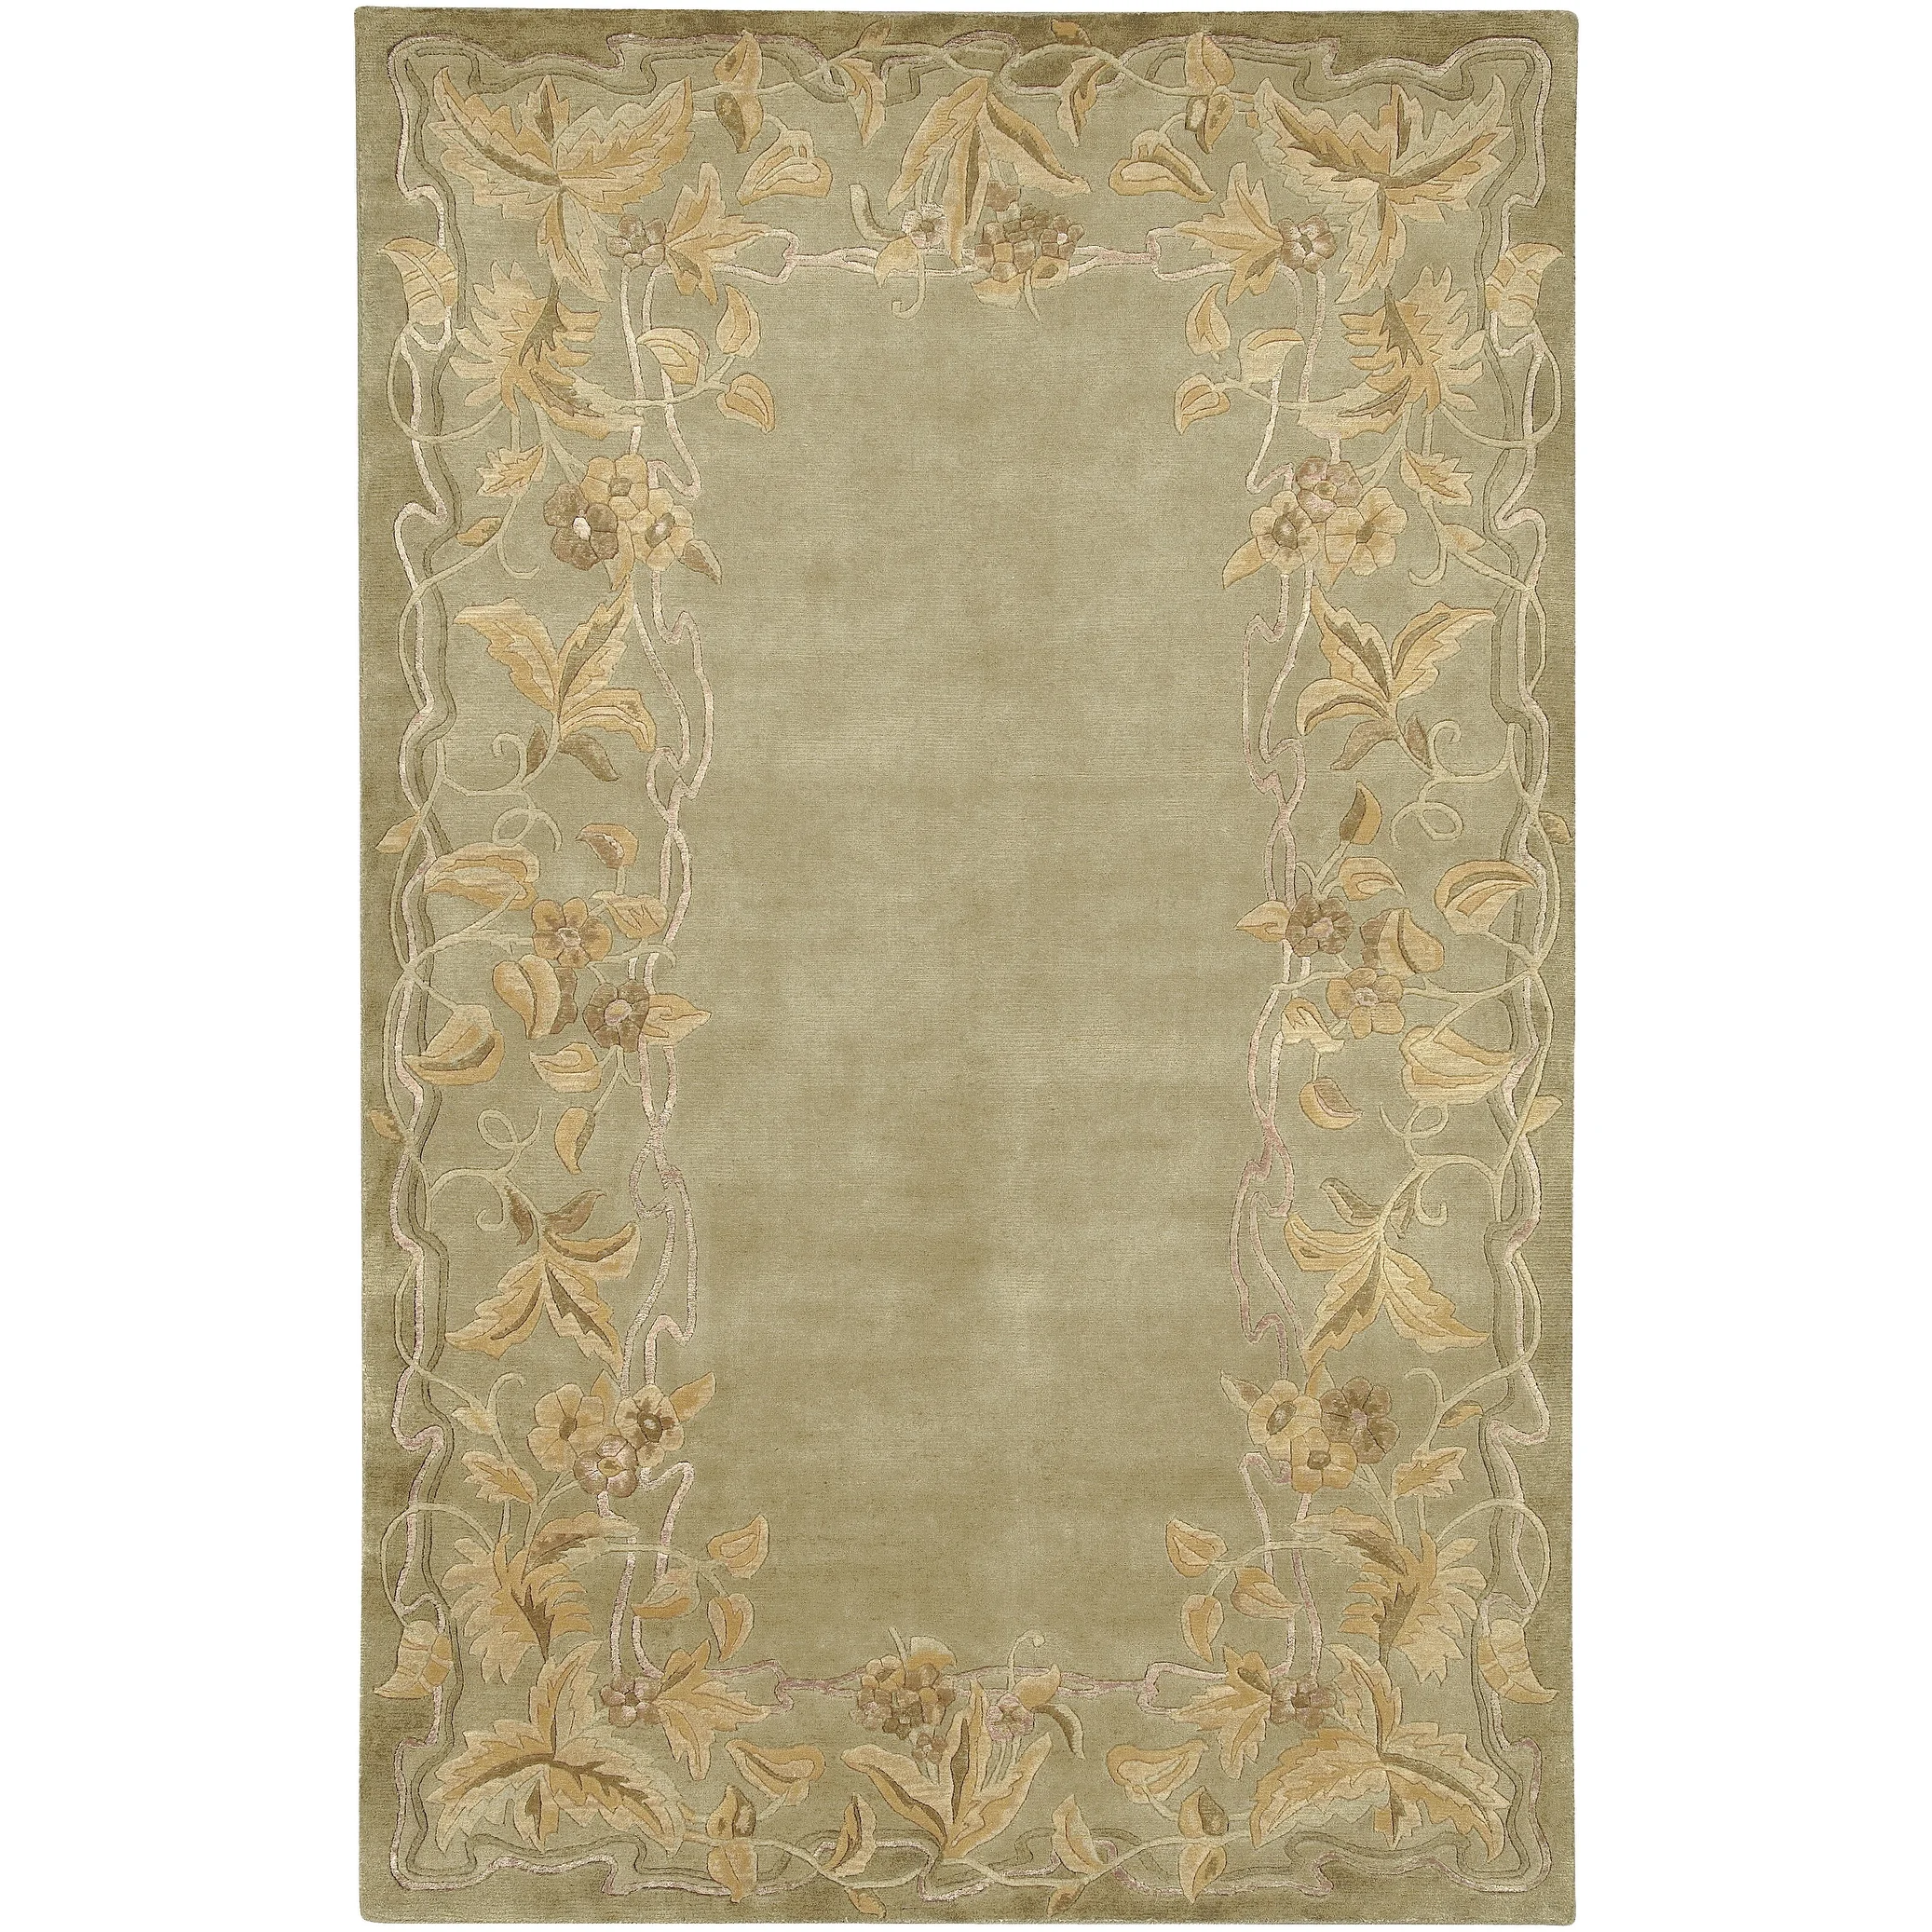 Hand-knotted Tan Neoteric Semi-Worsted New Zealand Wool Area Rug - 2' x 3'